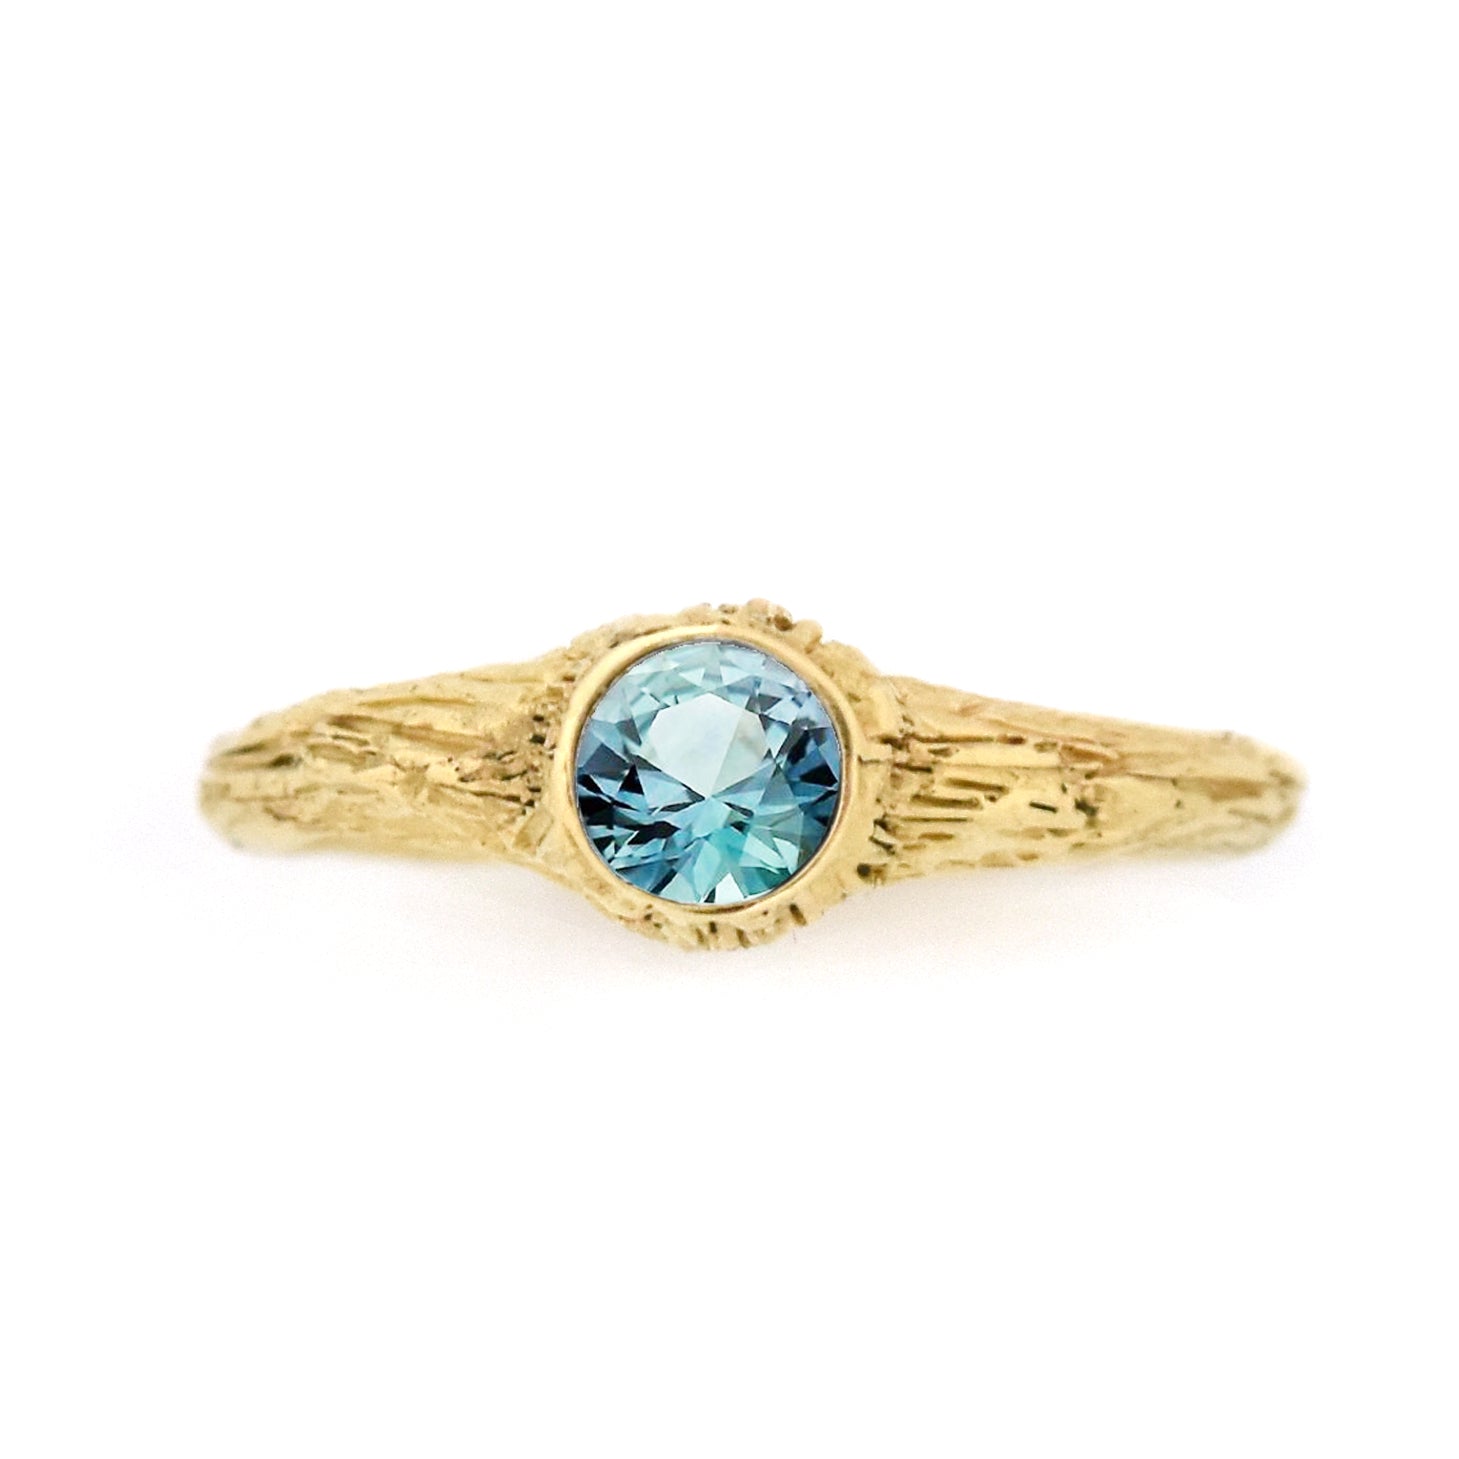 Gold Heartwood Diamond Ring - your choice of 5mm stone & gold - Wedding Ring Montana Sapphire / 18K Palladium White Gold Montana Sapphire / 14K Rose Gold 6329 - handmade by Beth Millner Jewelry